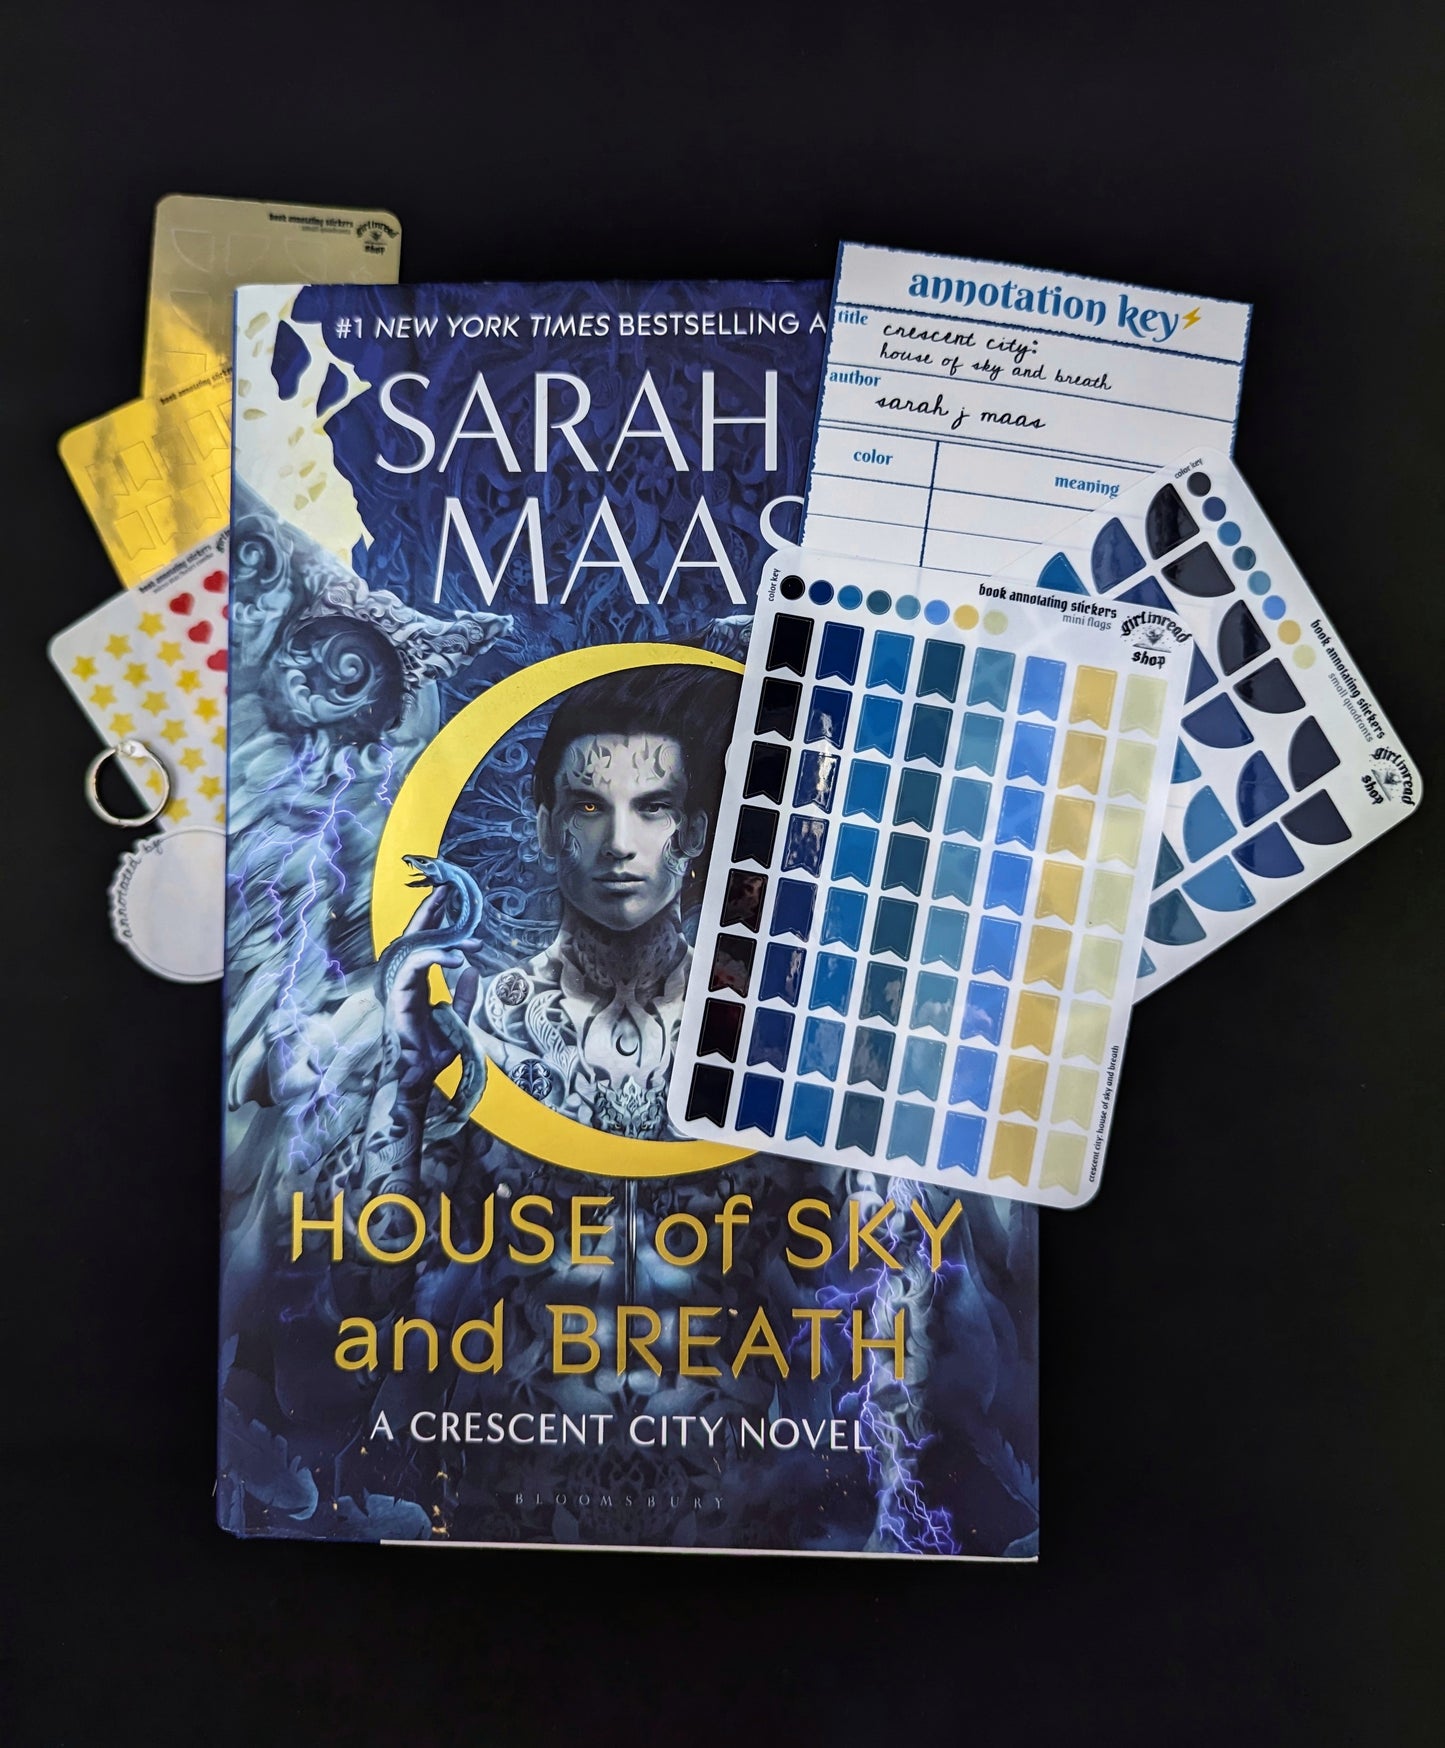 crescent city: house of sky and breath book annotating giftset (book included)